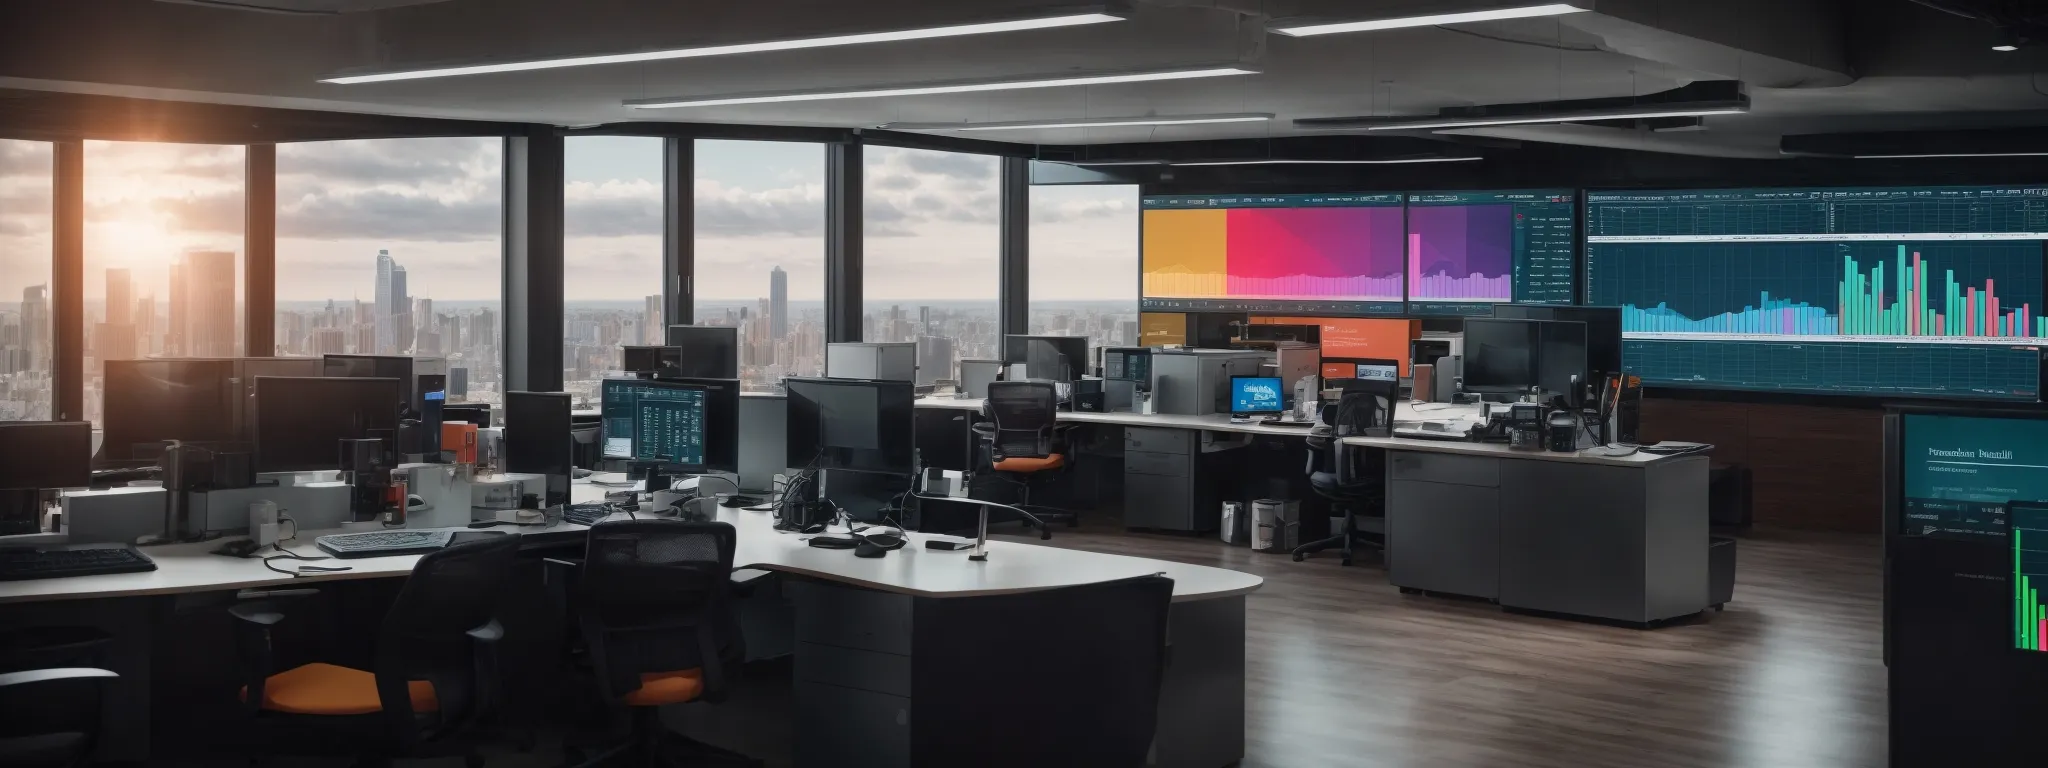 a modern office with a large, interactive dashboard displaying colorful analytics graphs and search trends.